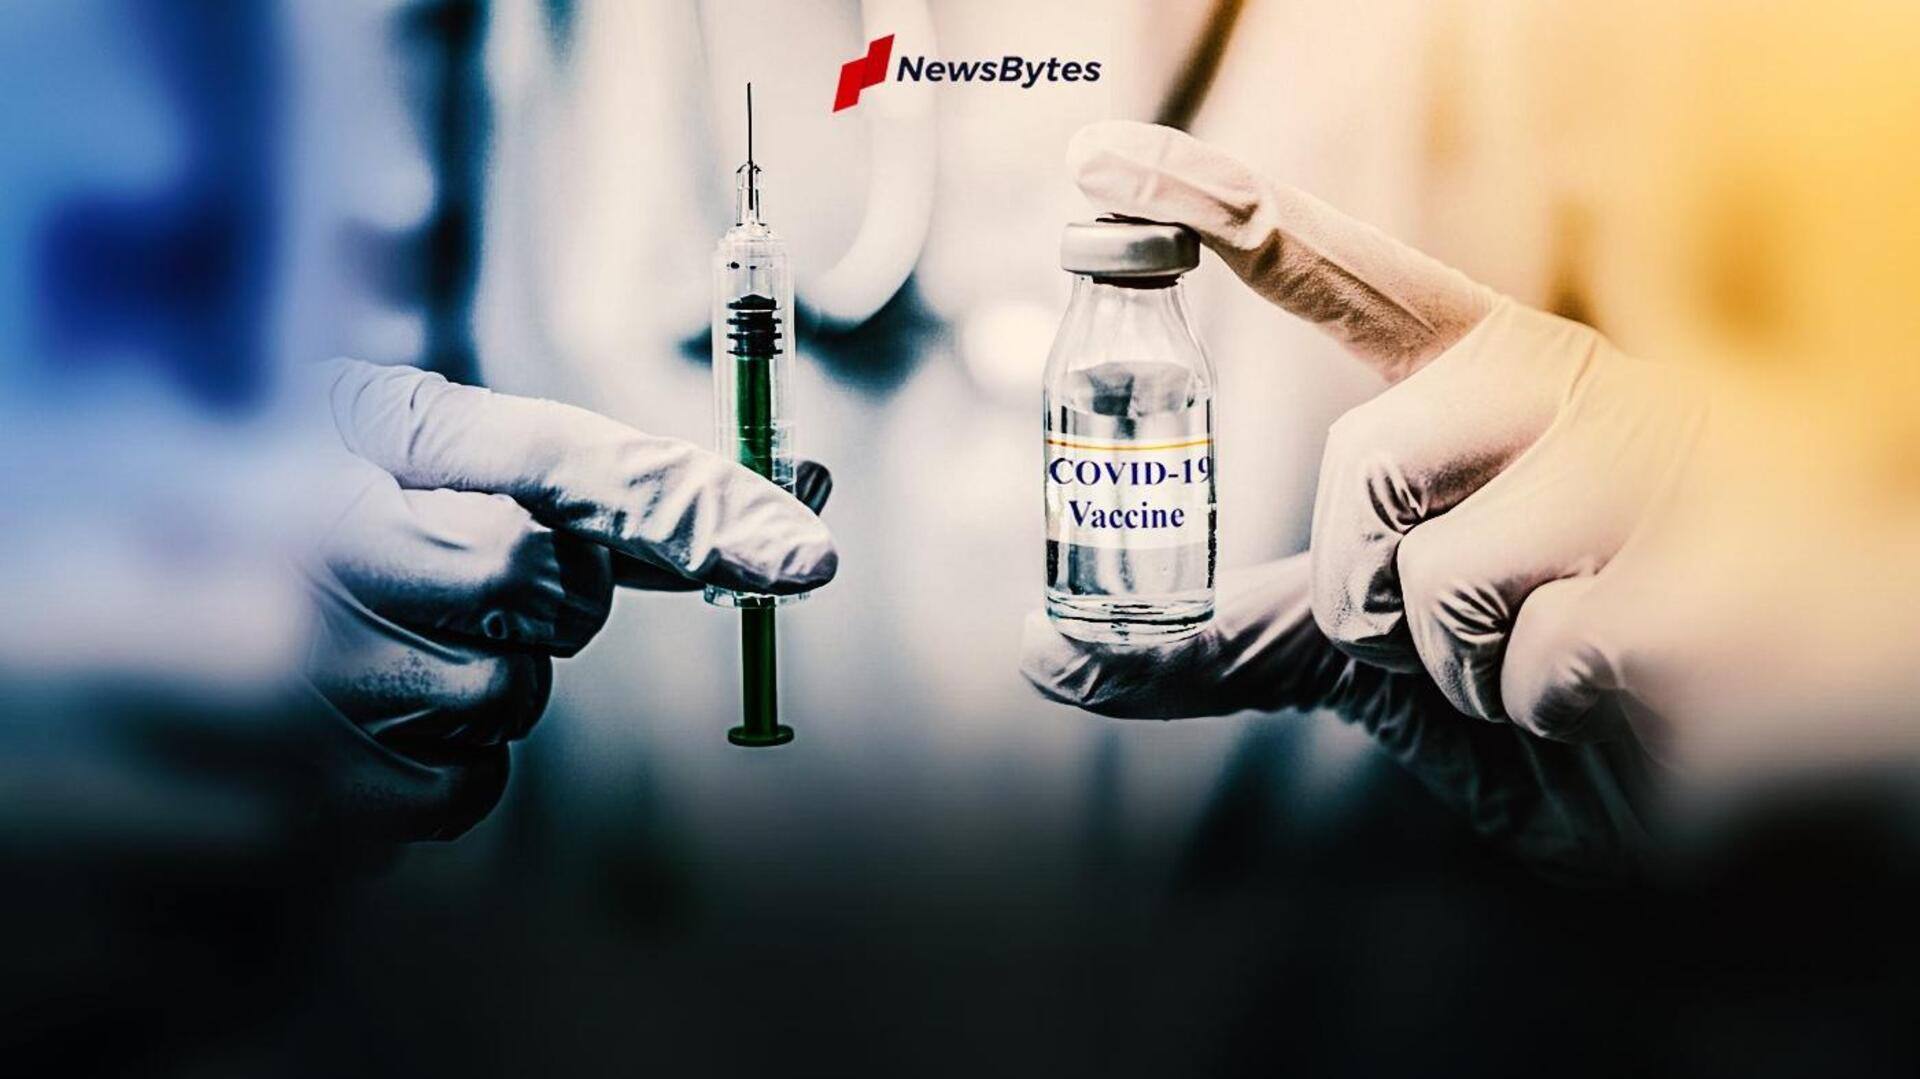 'Hypervaccinated' man gets 217 COVID-19 jabs for 'private reasons'